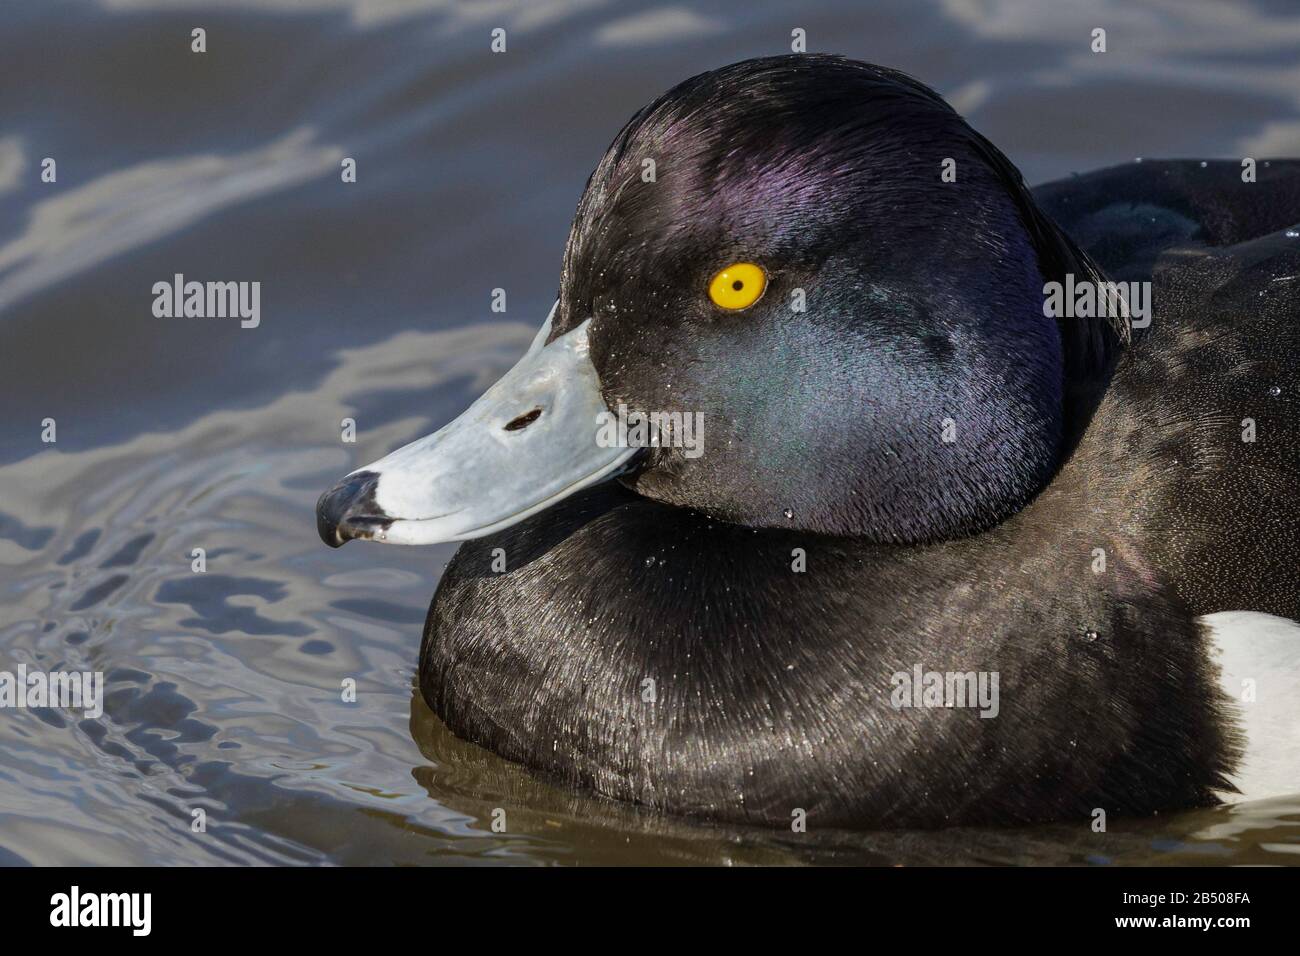 Male adult tufted duck Stock Photo